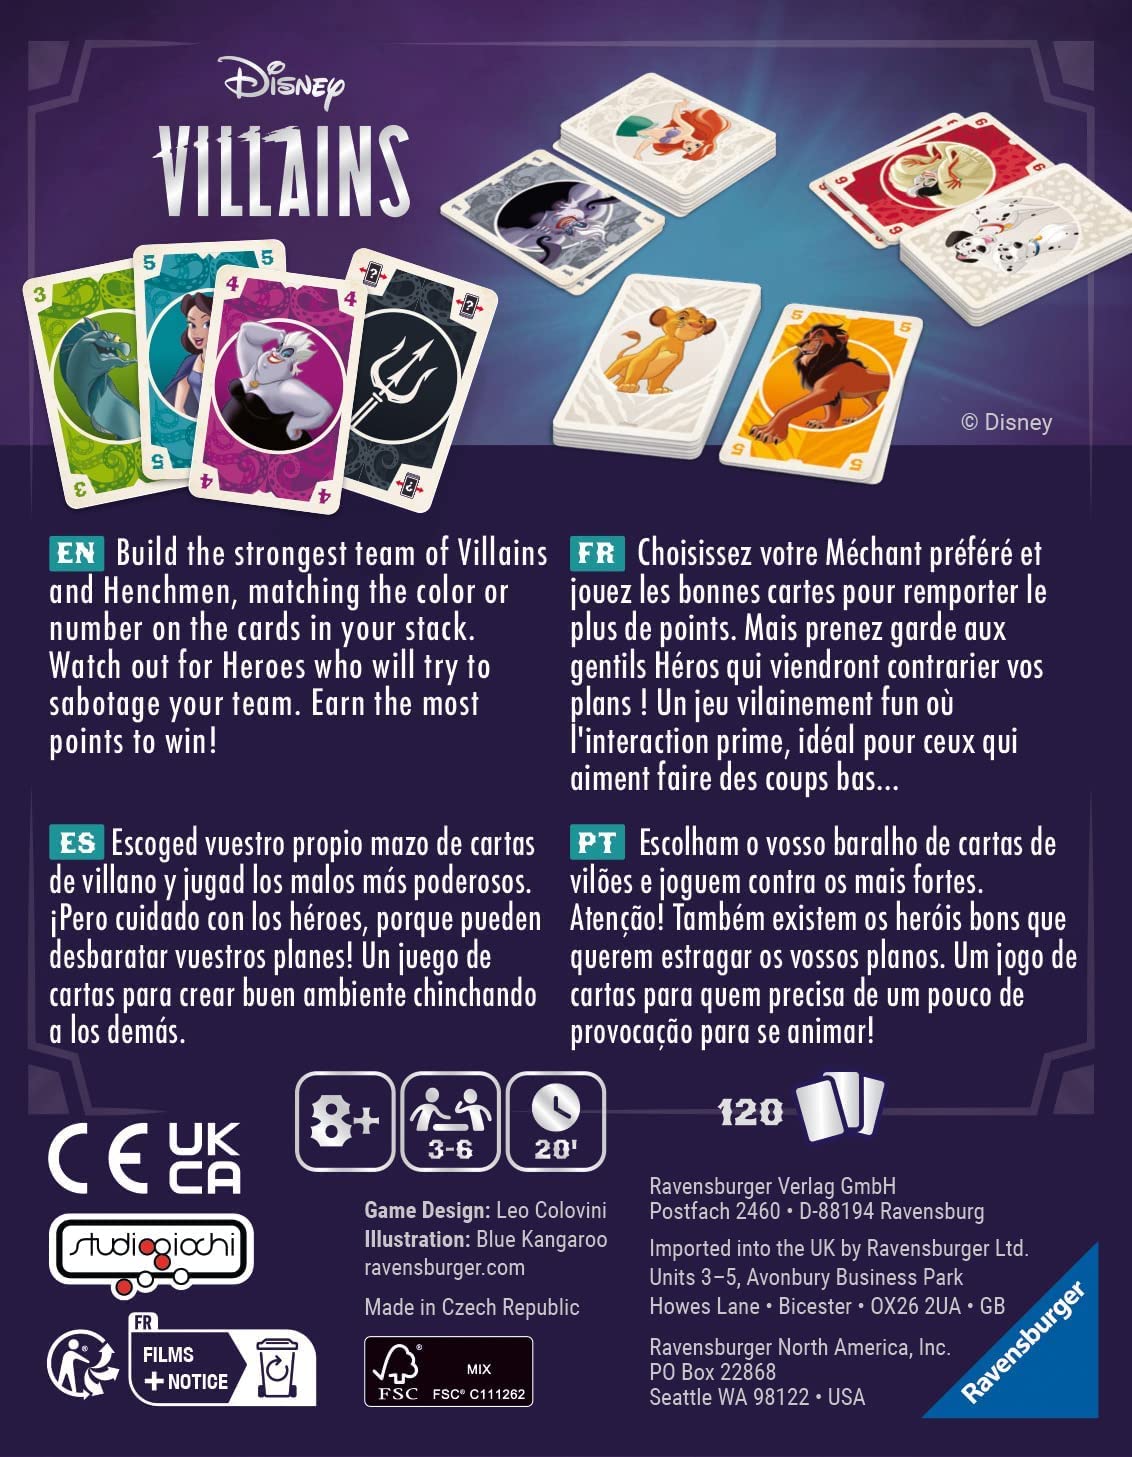 Ravensburger Disney Villains The Card Game – A Wickedly Fun Card Game for Boys and Girls Ages 8 and Up